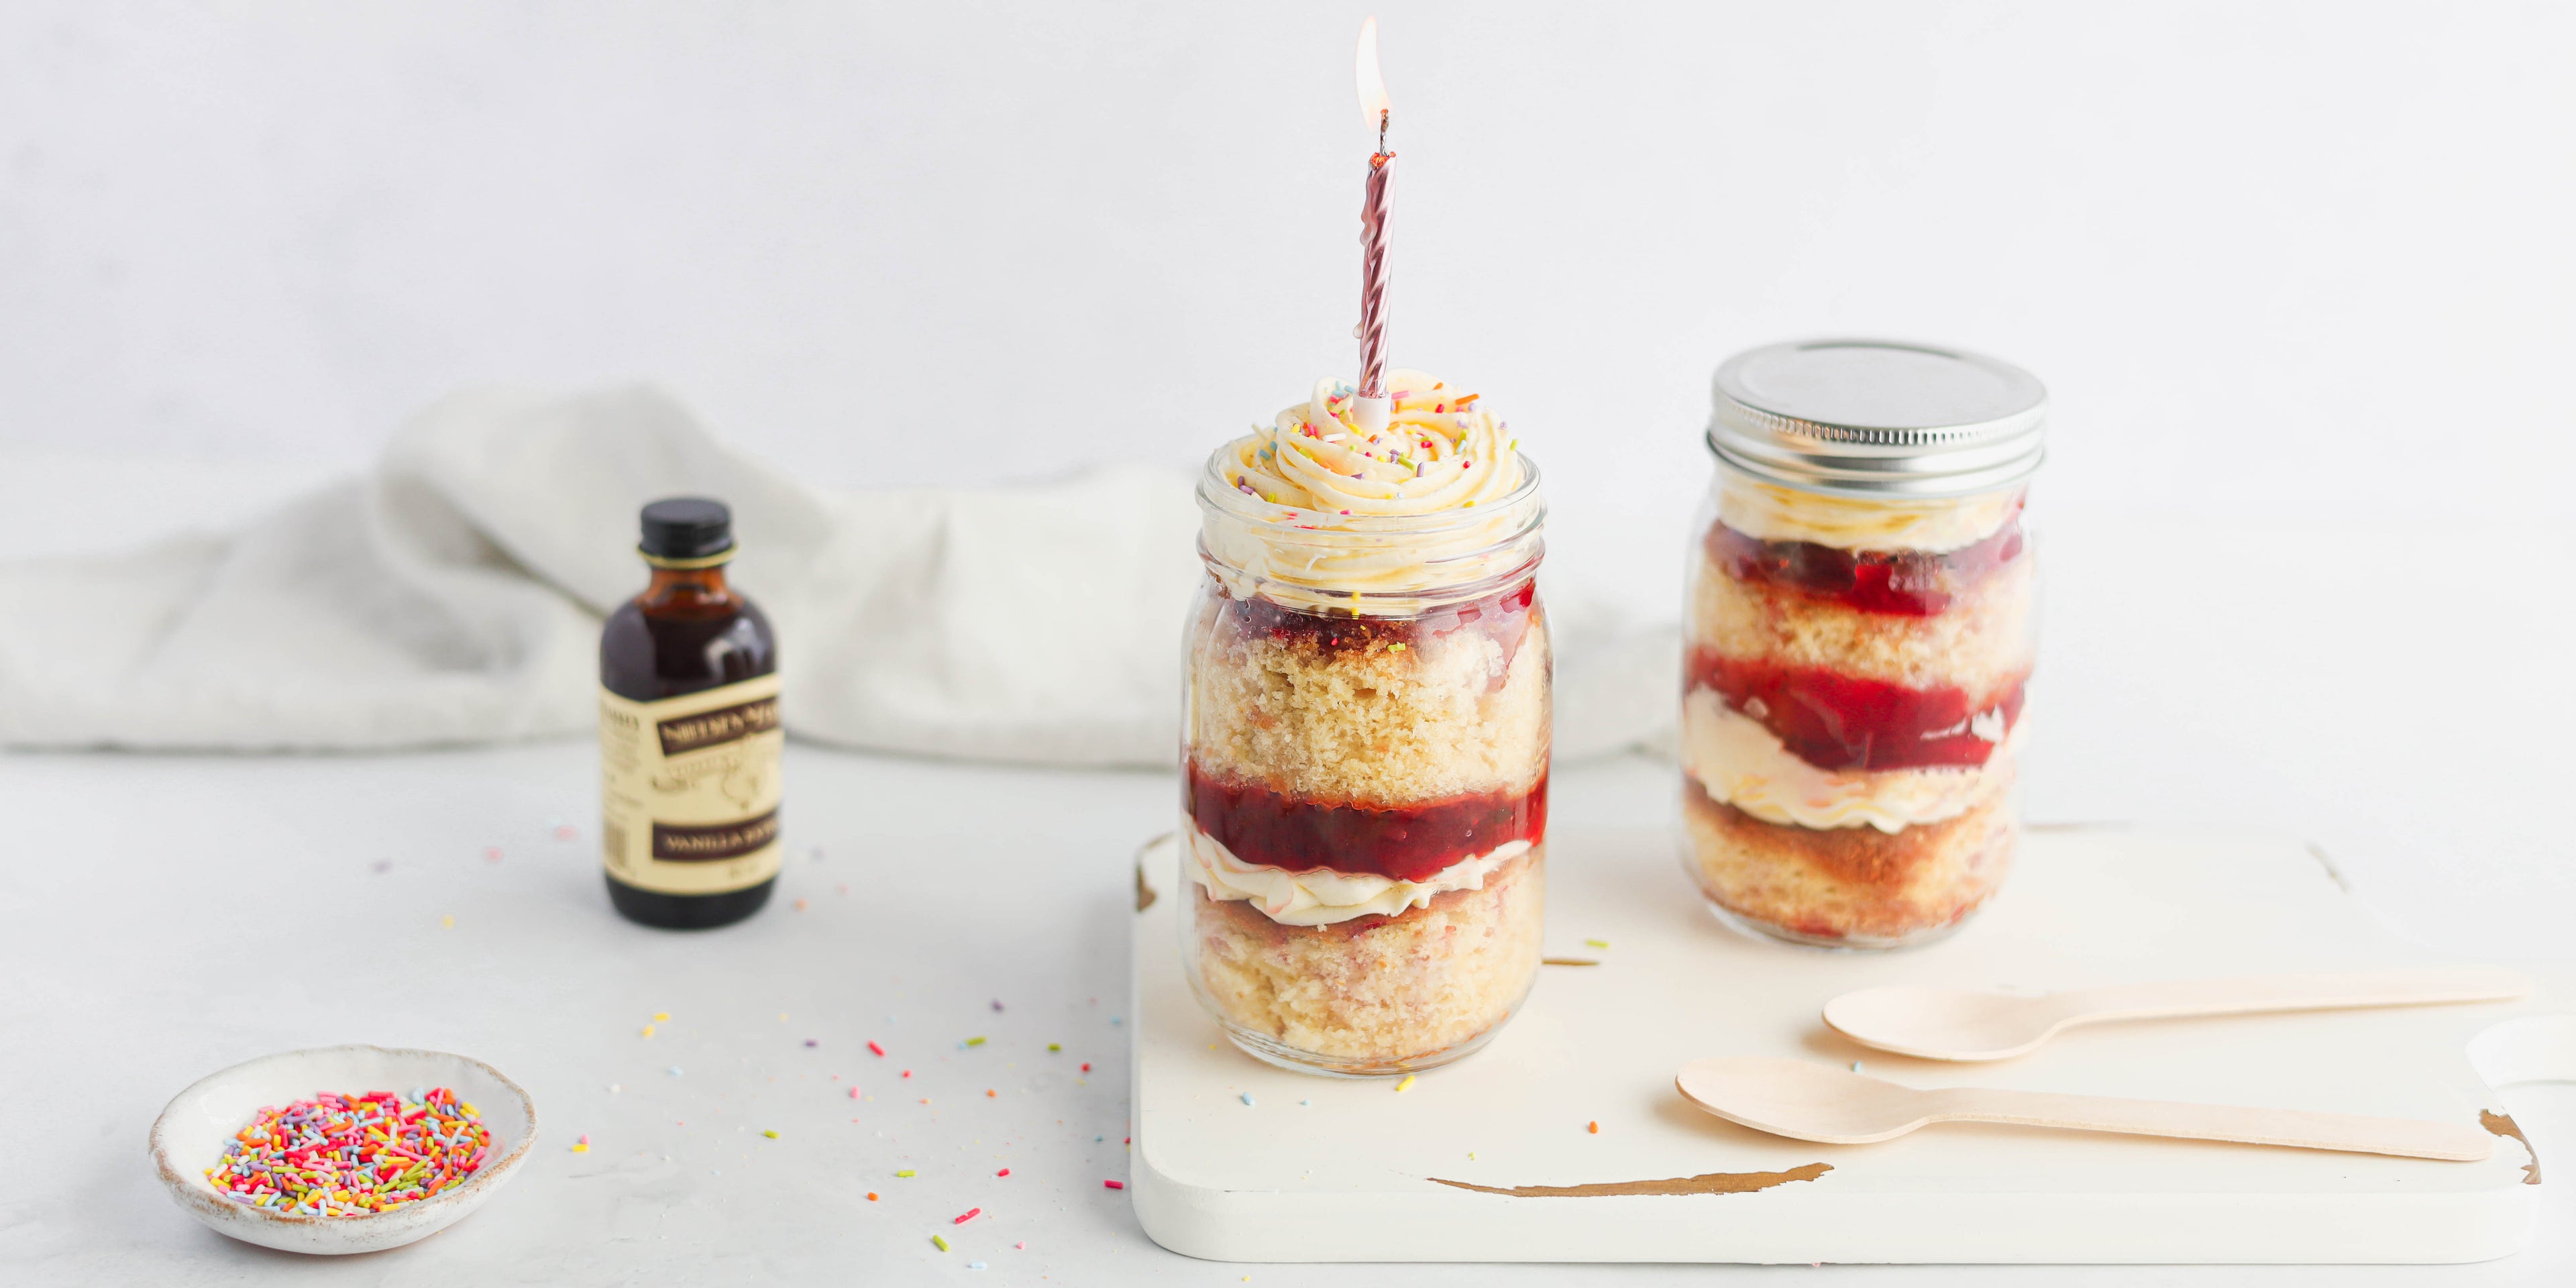 Vanilla Cupcakes in a Jar with a birthday candles and a bottle of Neilsen-Massey vanilla extract